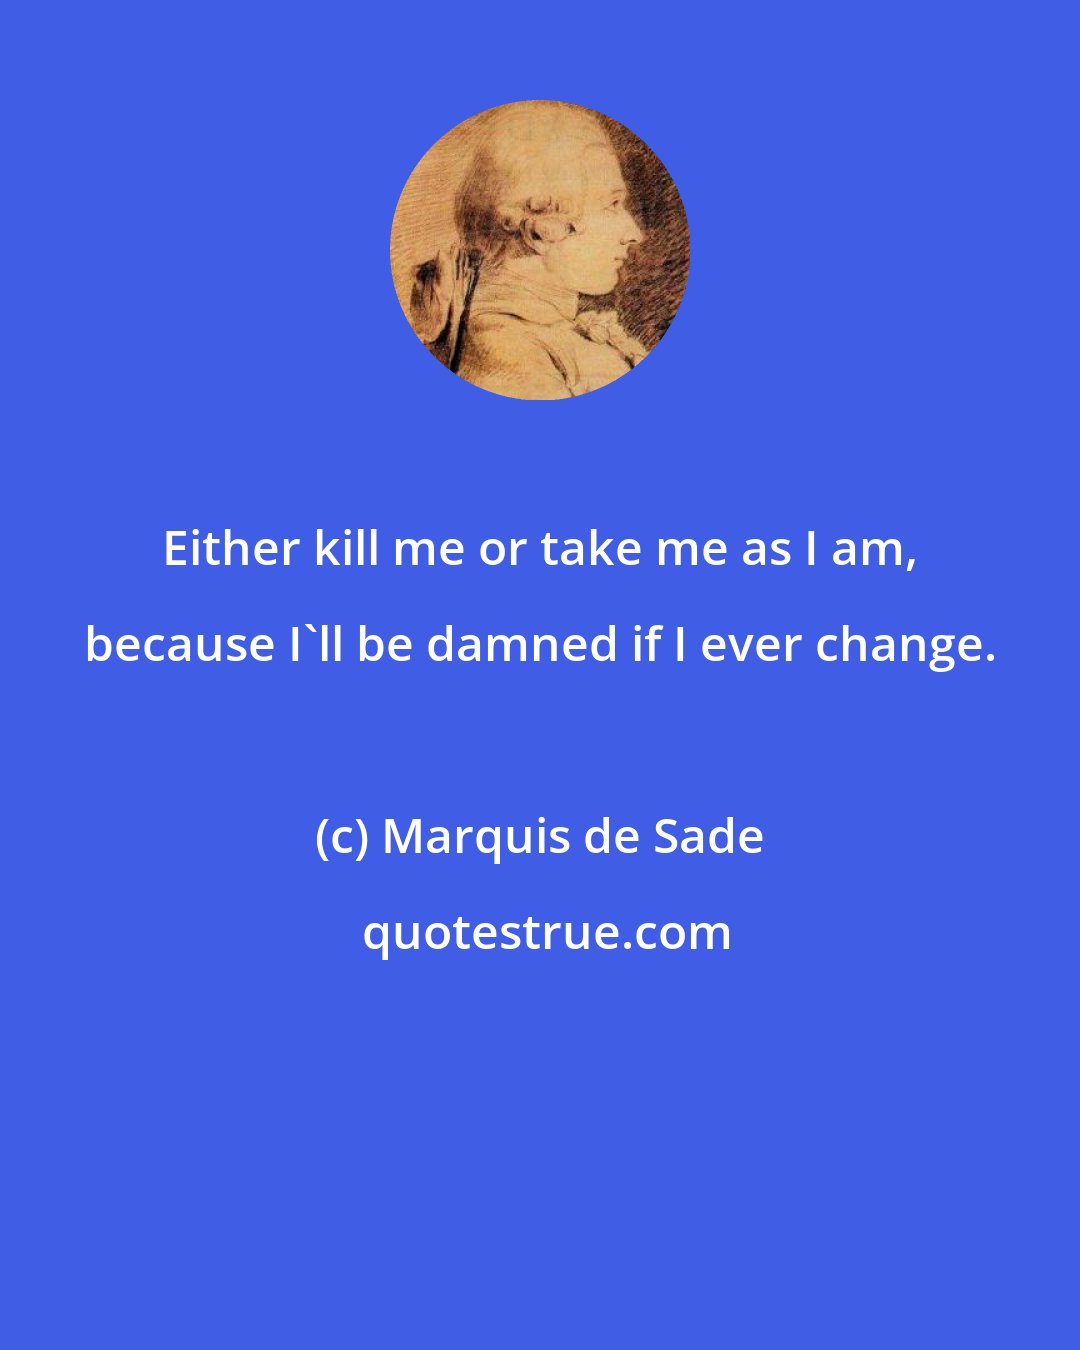 Marquis de Sade: Either kill me or take me as I am, because I'll be damned if I ever change.